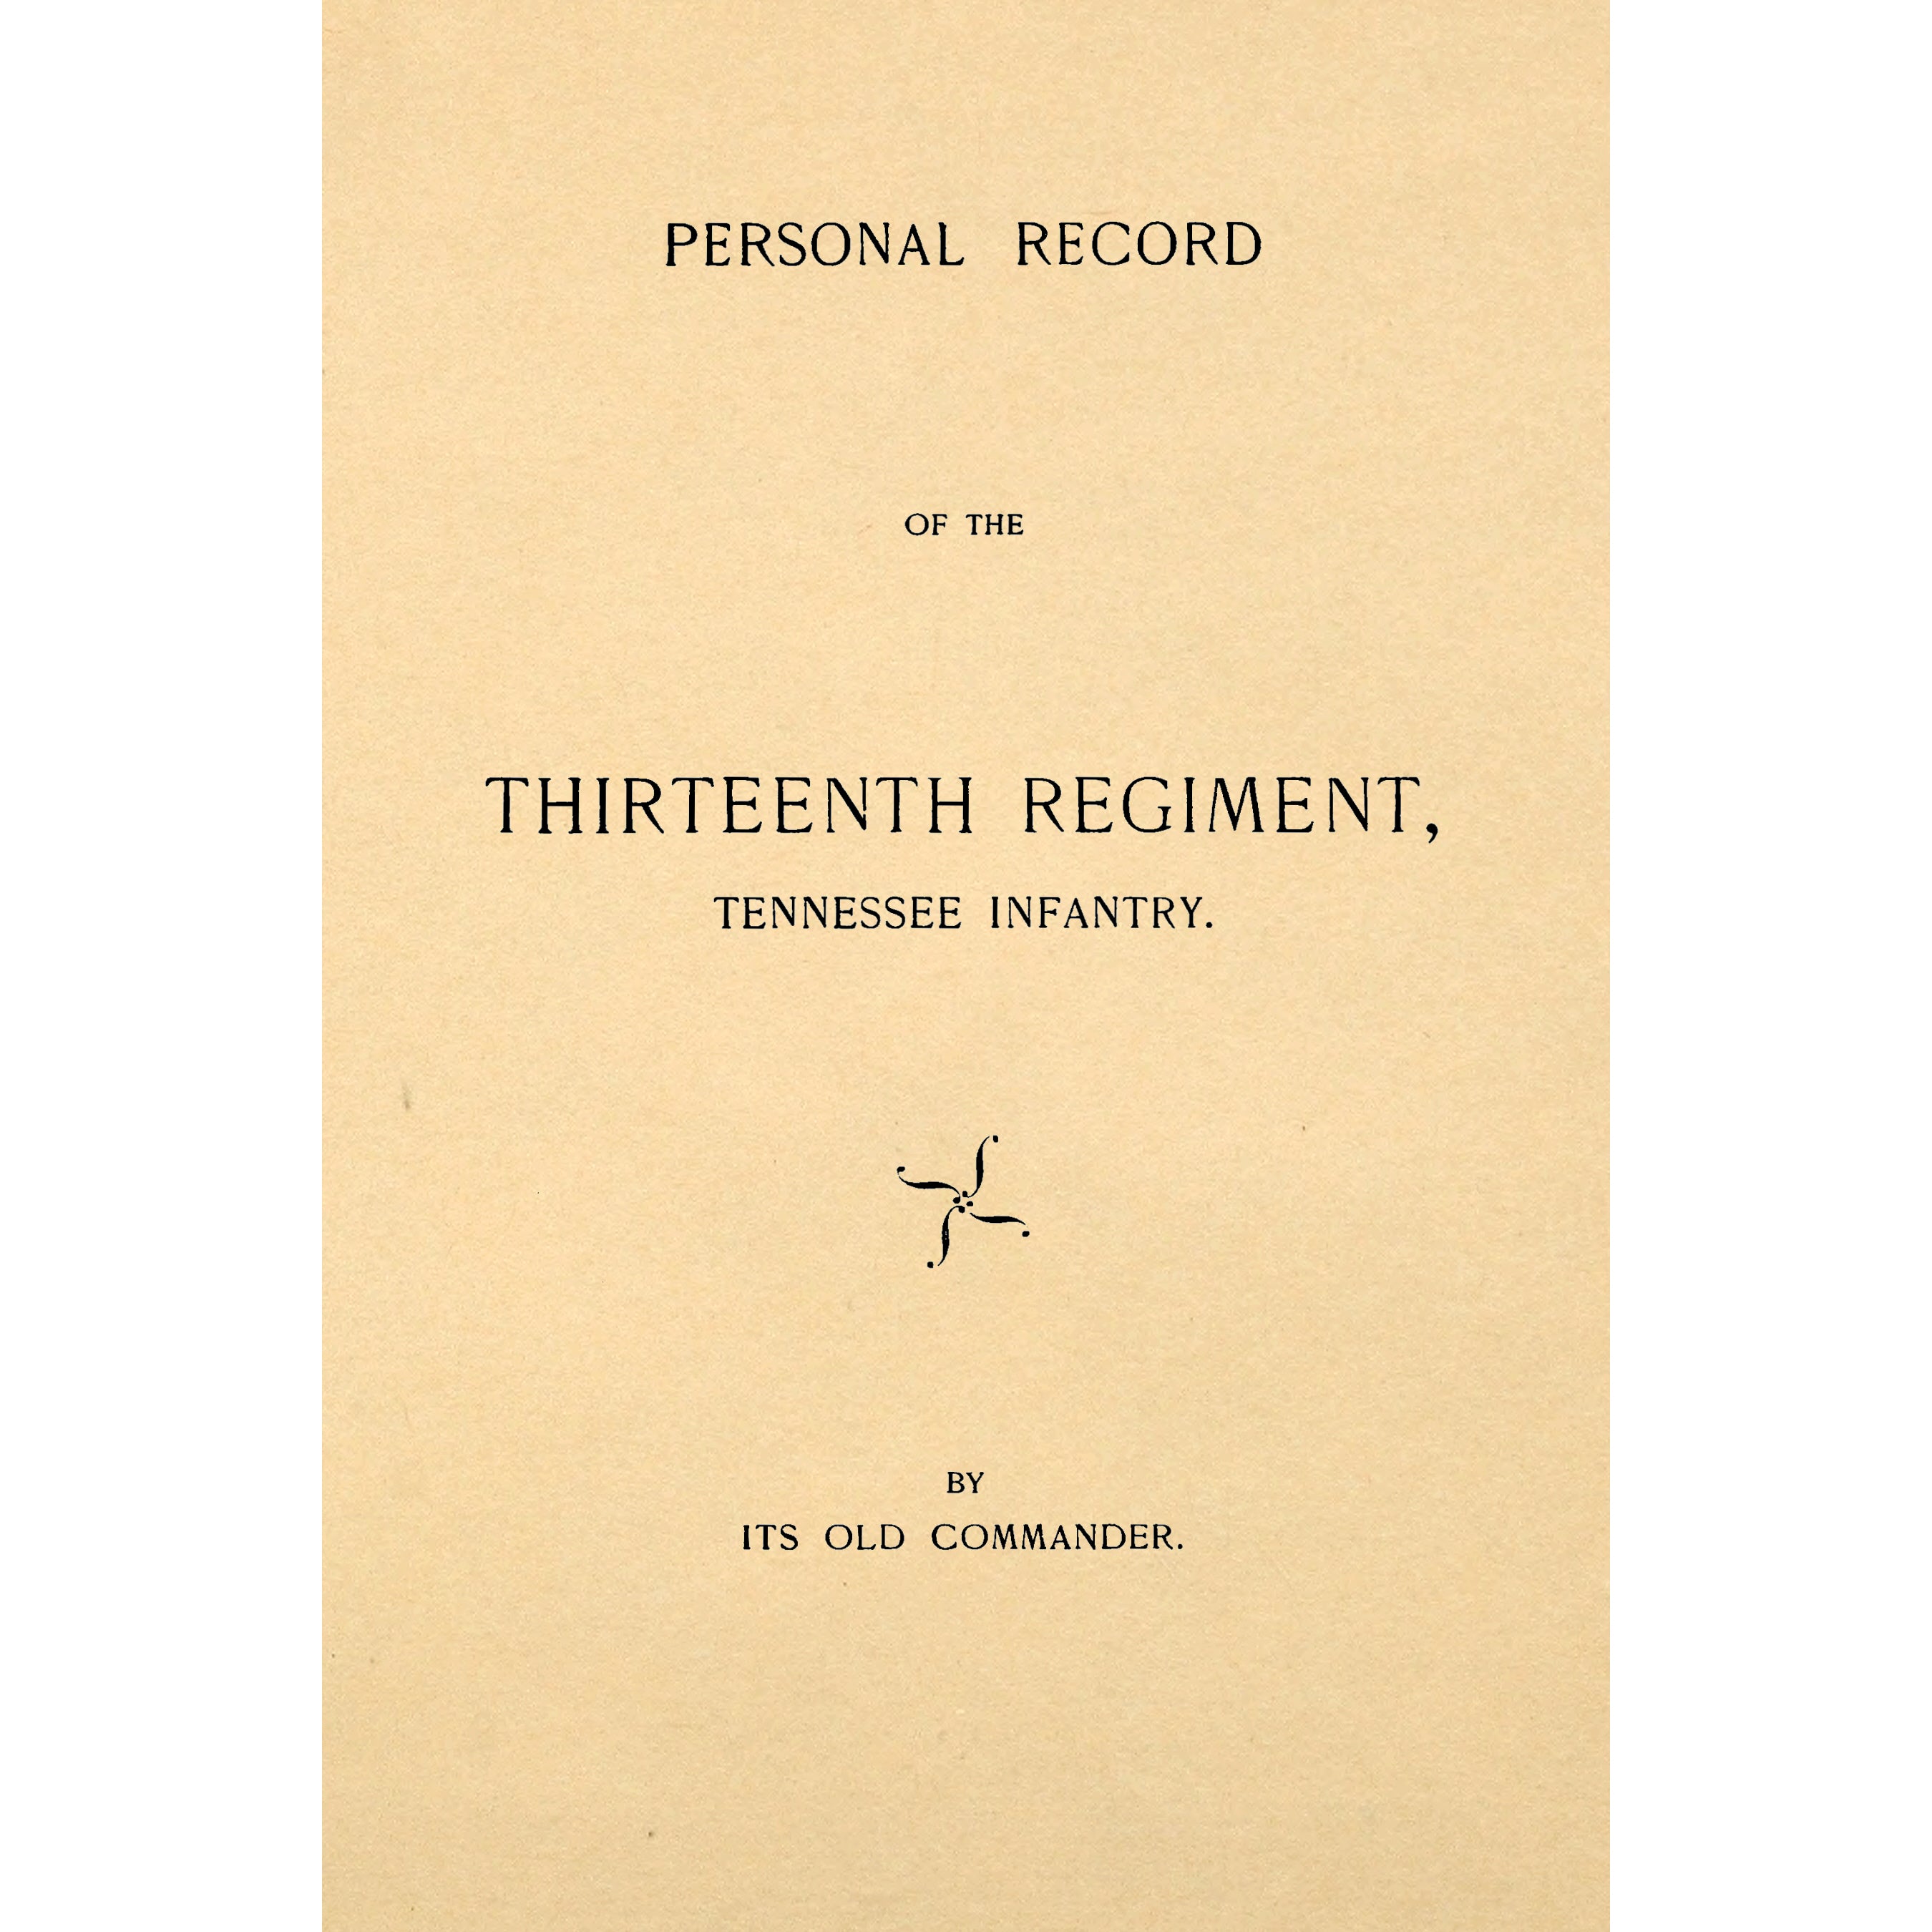 Personal Record of the Thirteenth regiment, Tennessee Infantry